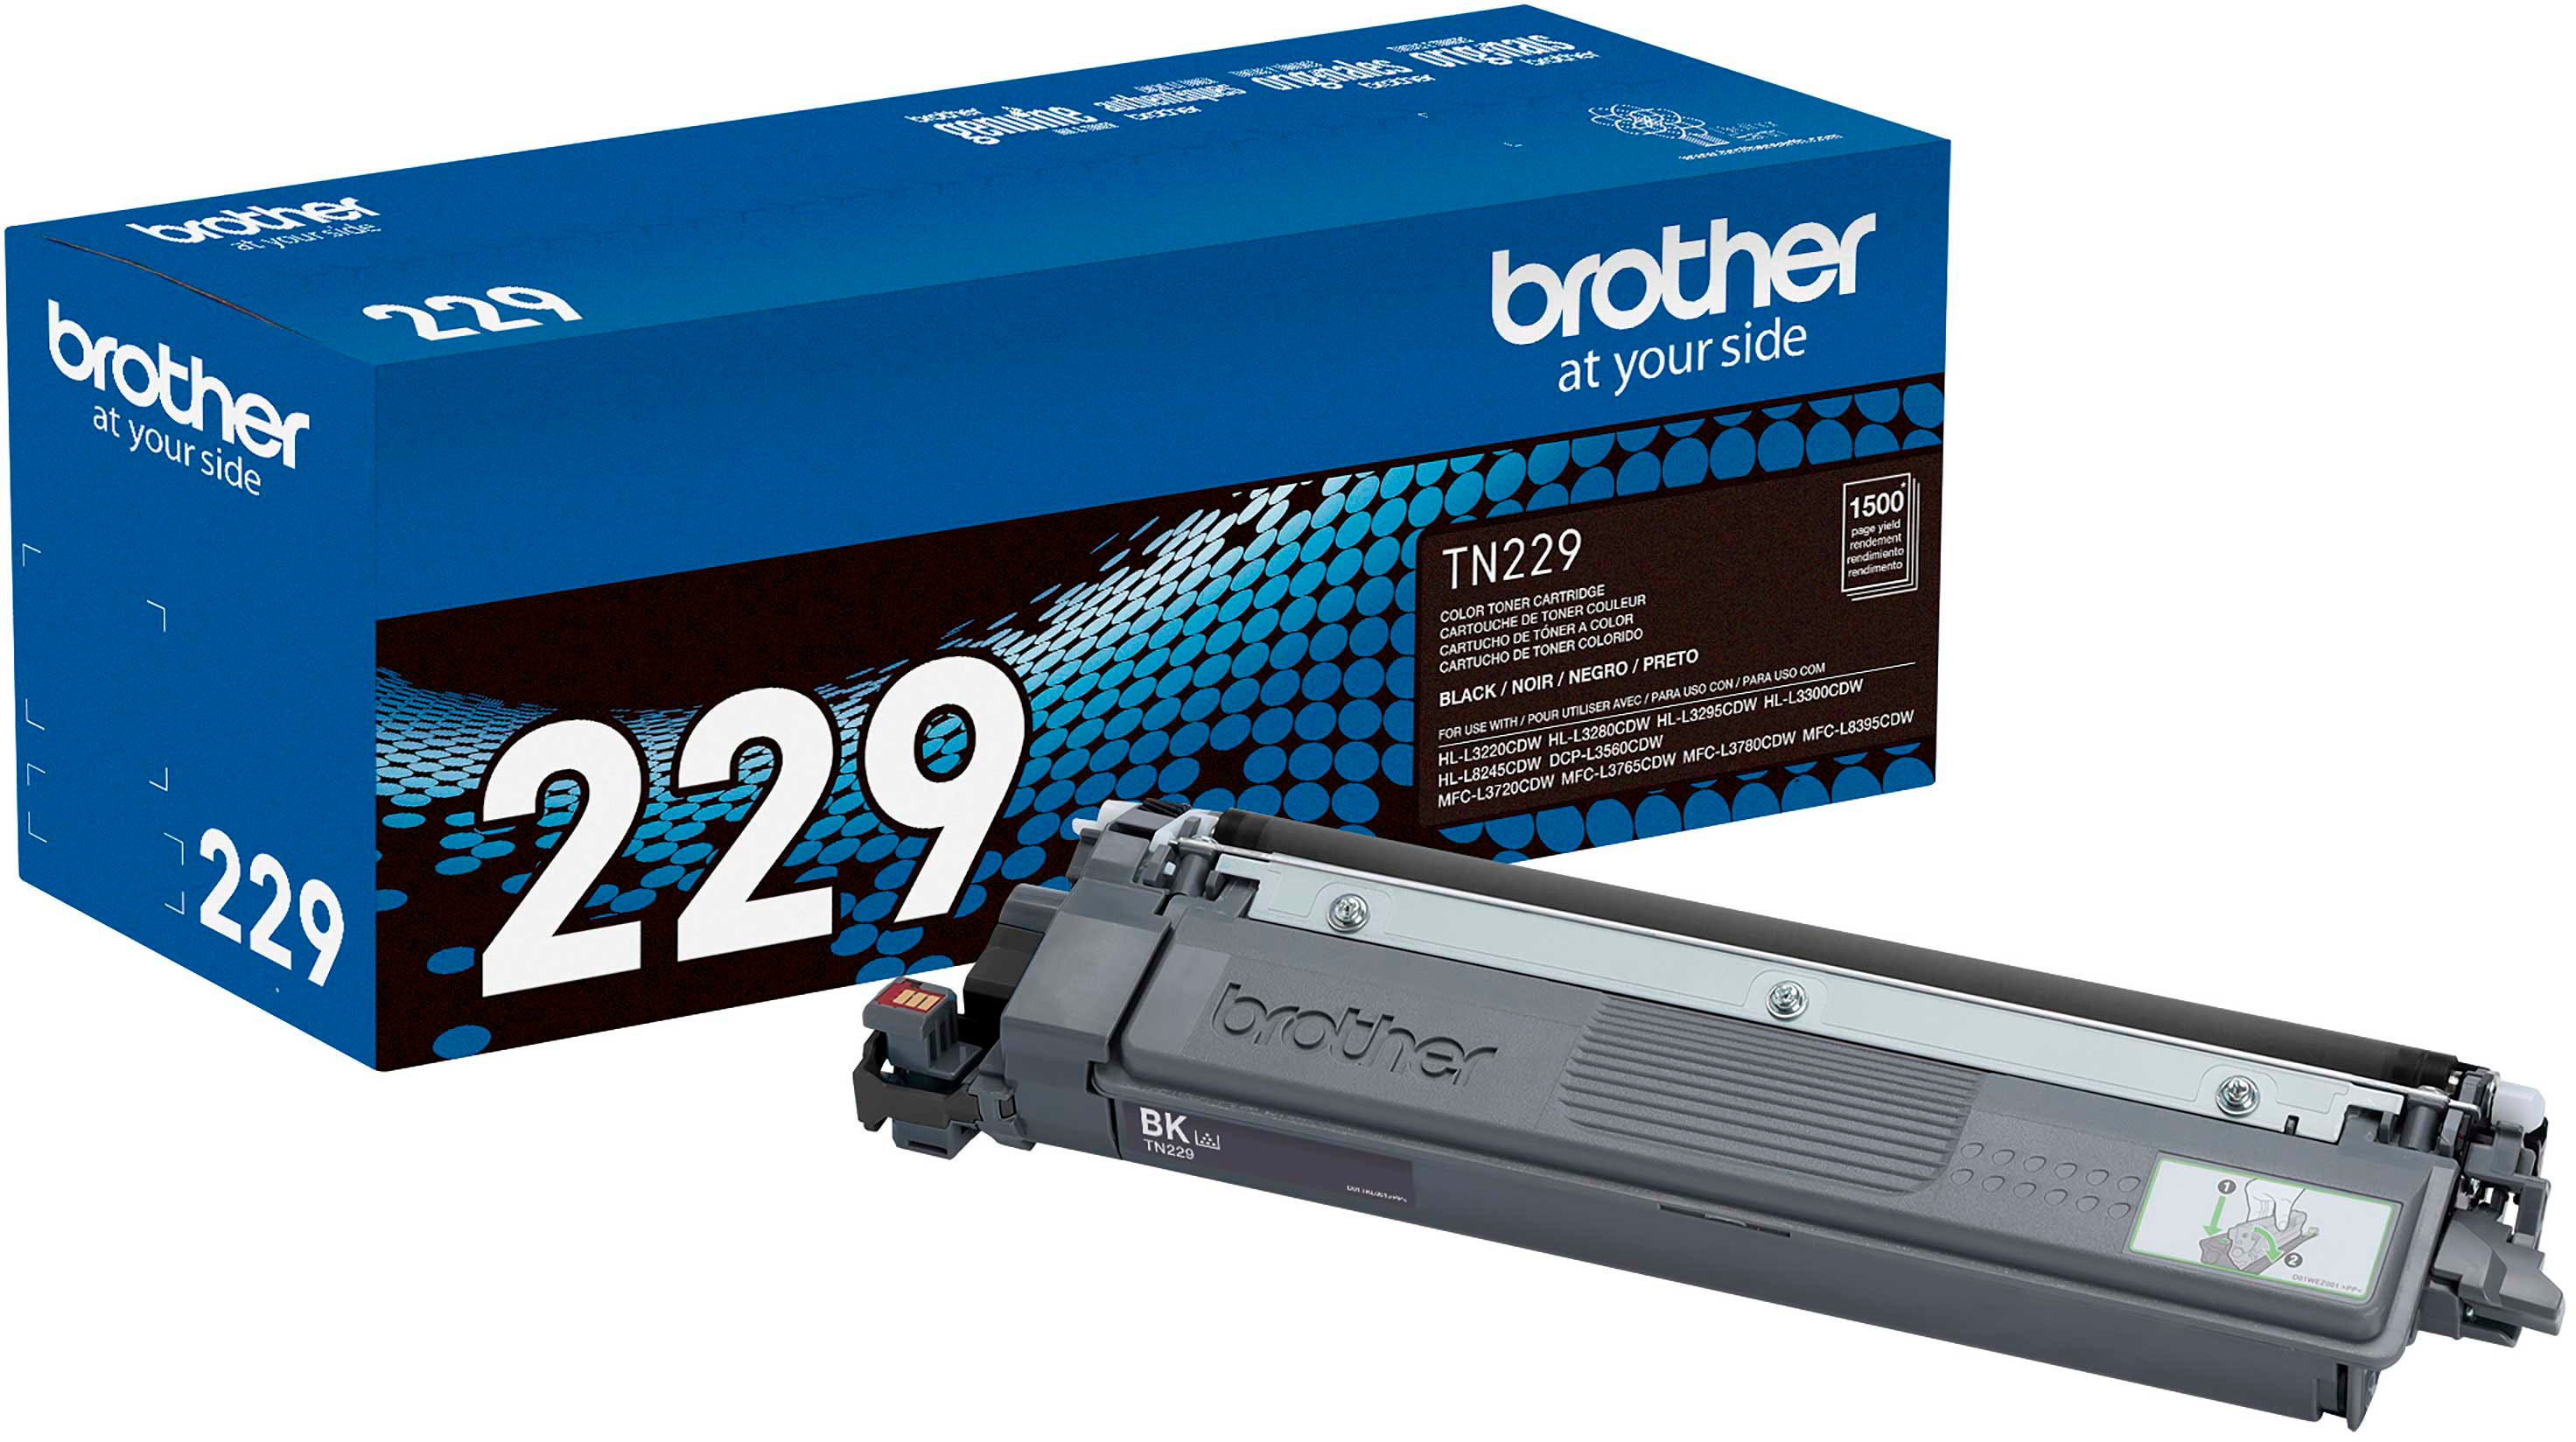 BROTHER TN-243CMYK TONER CARTRIDGE'S 1K PAGES